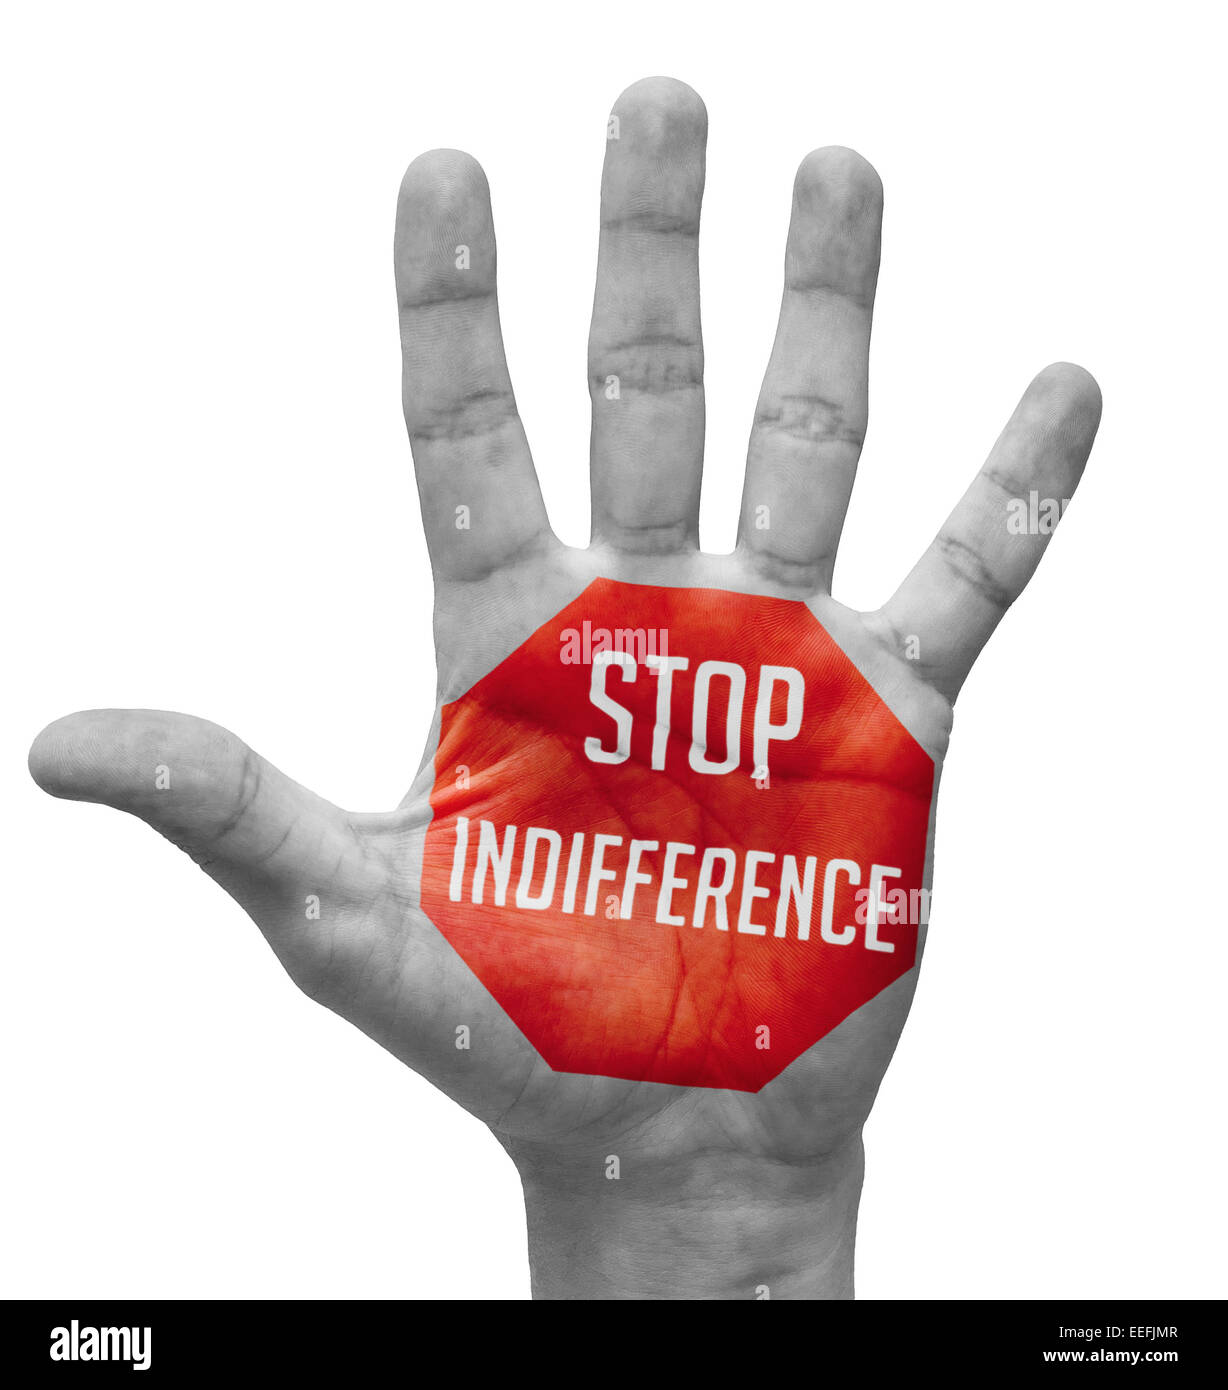 Stop Indifference on Open Hand. Stock Photo